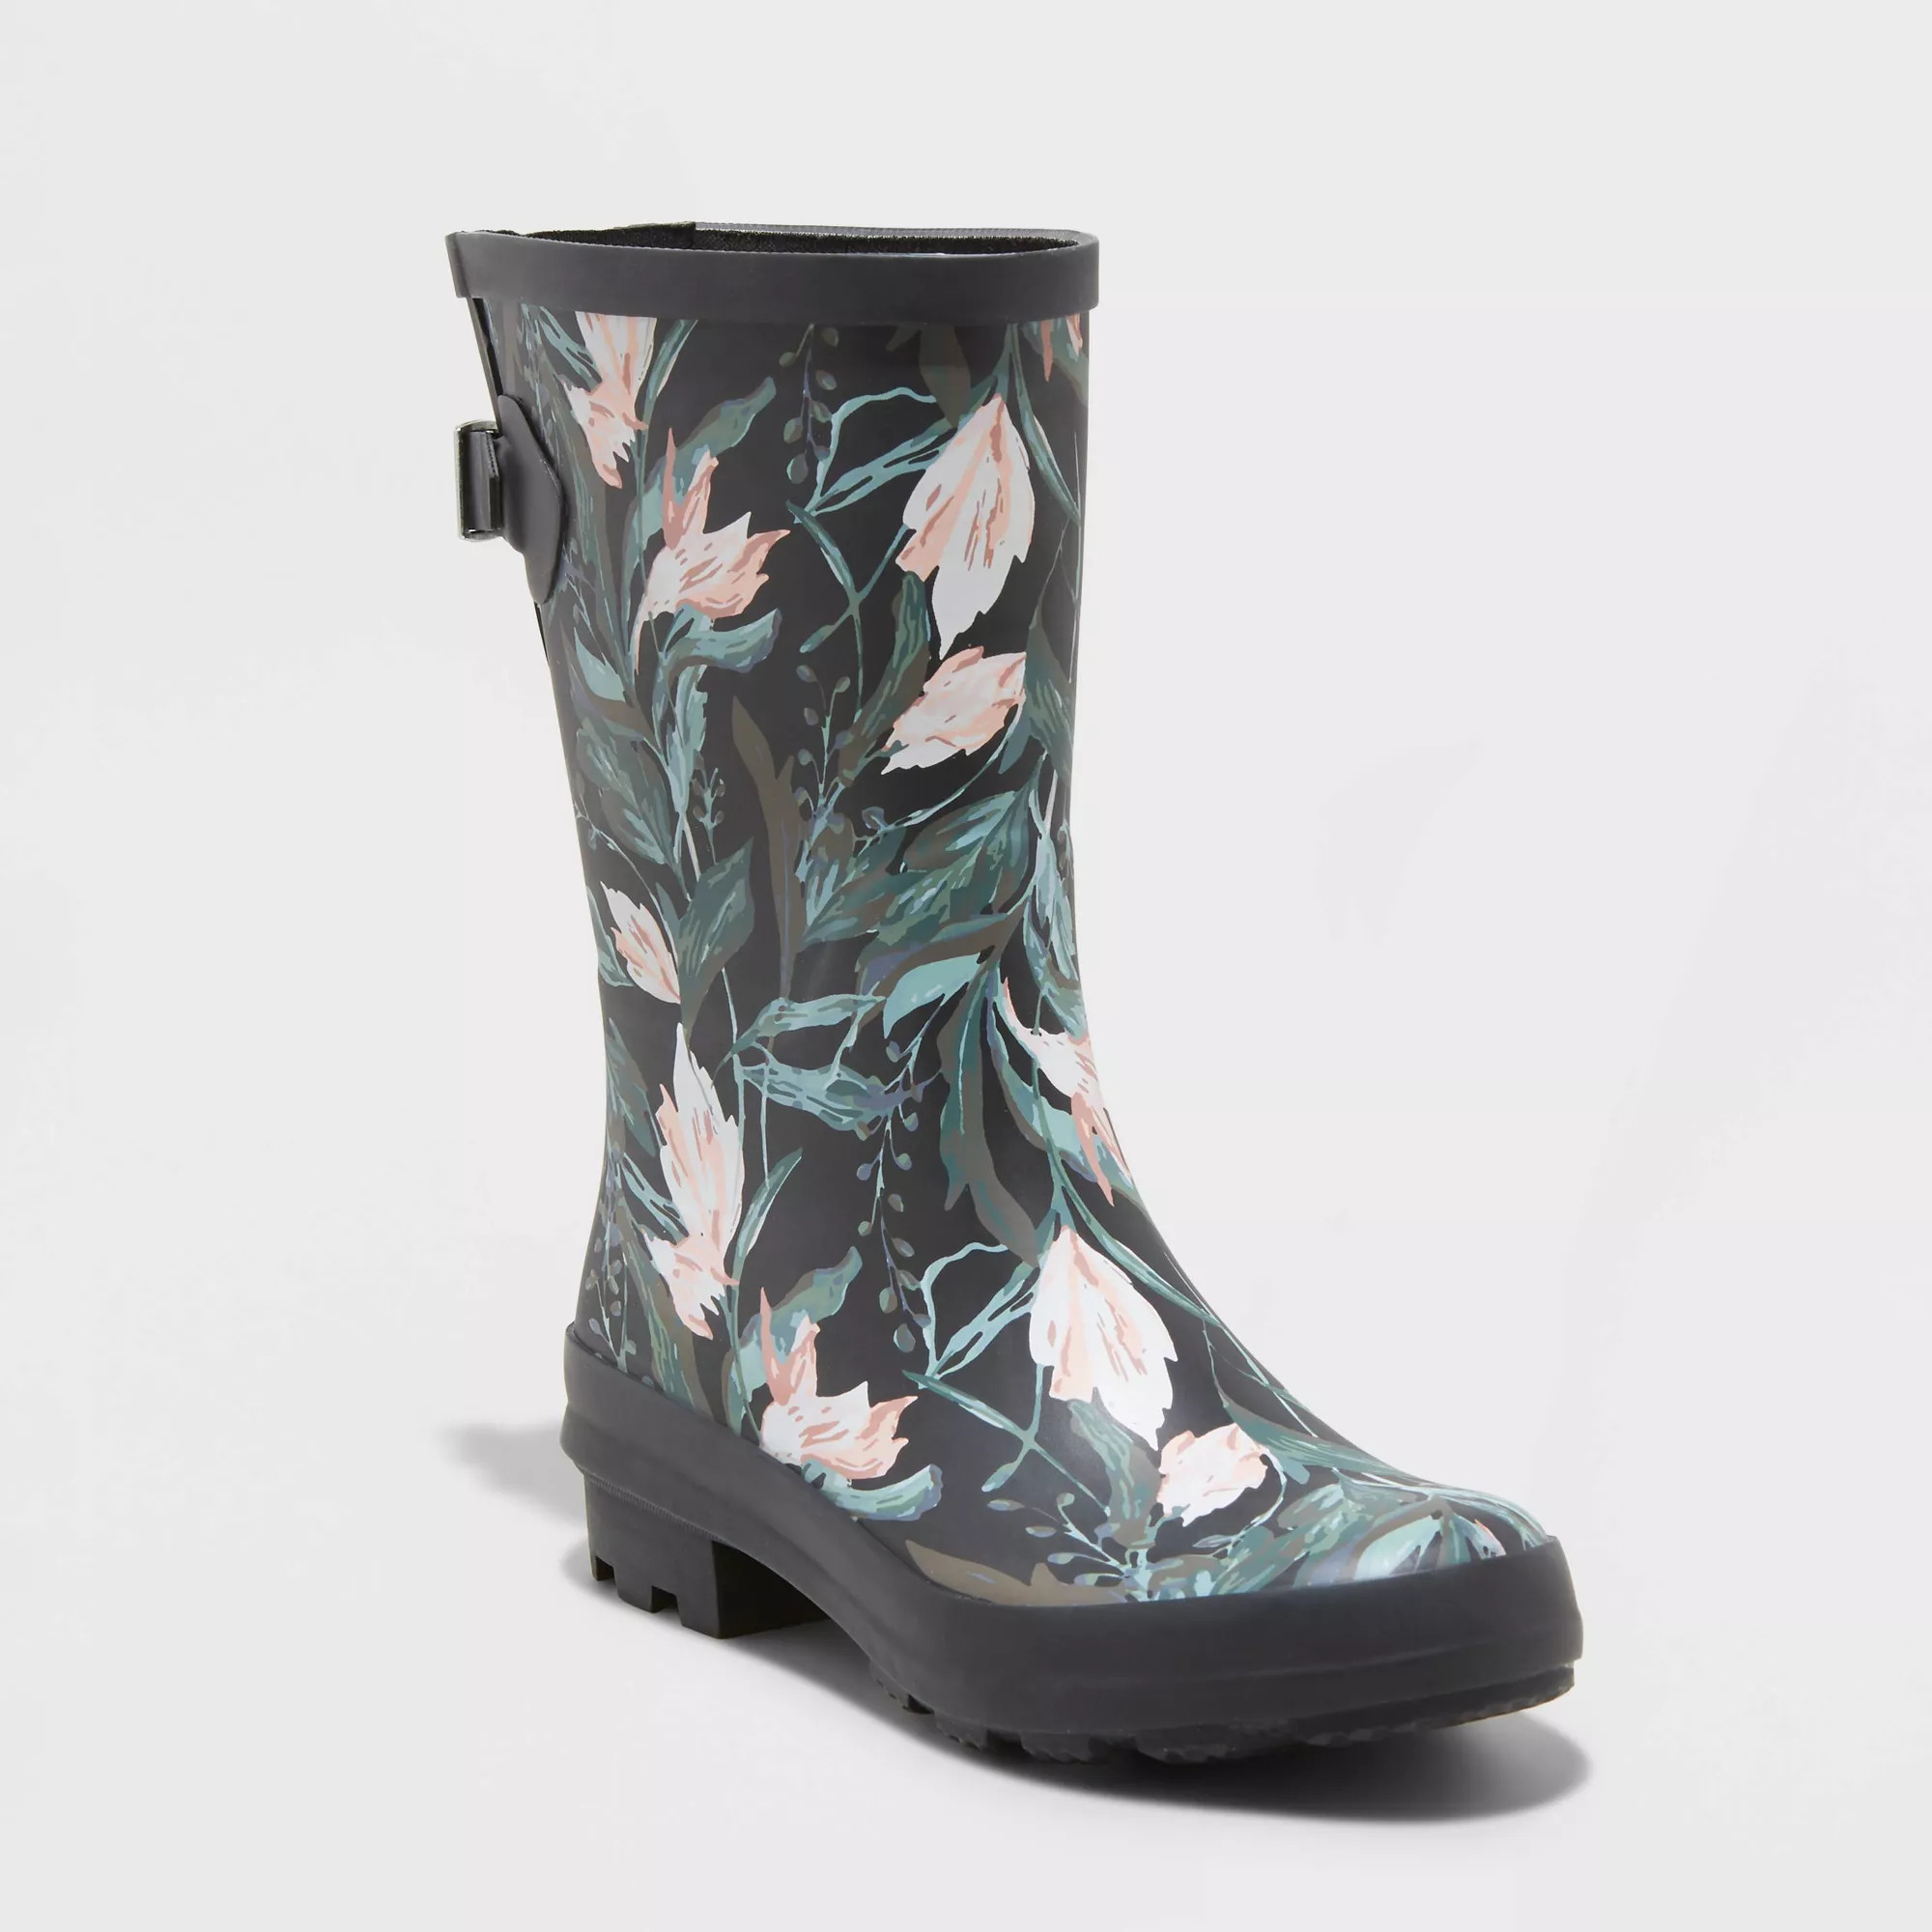 Floral patterned rain boot with mid-calf height and side buckle detail